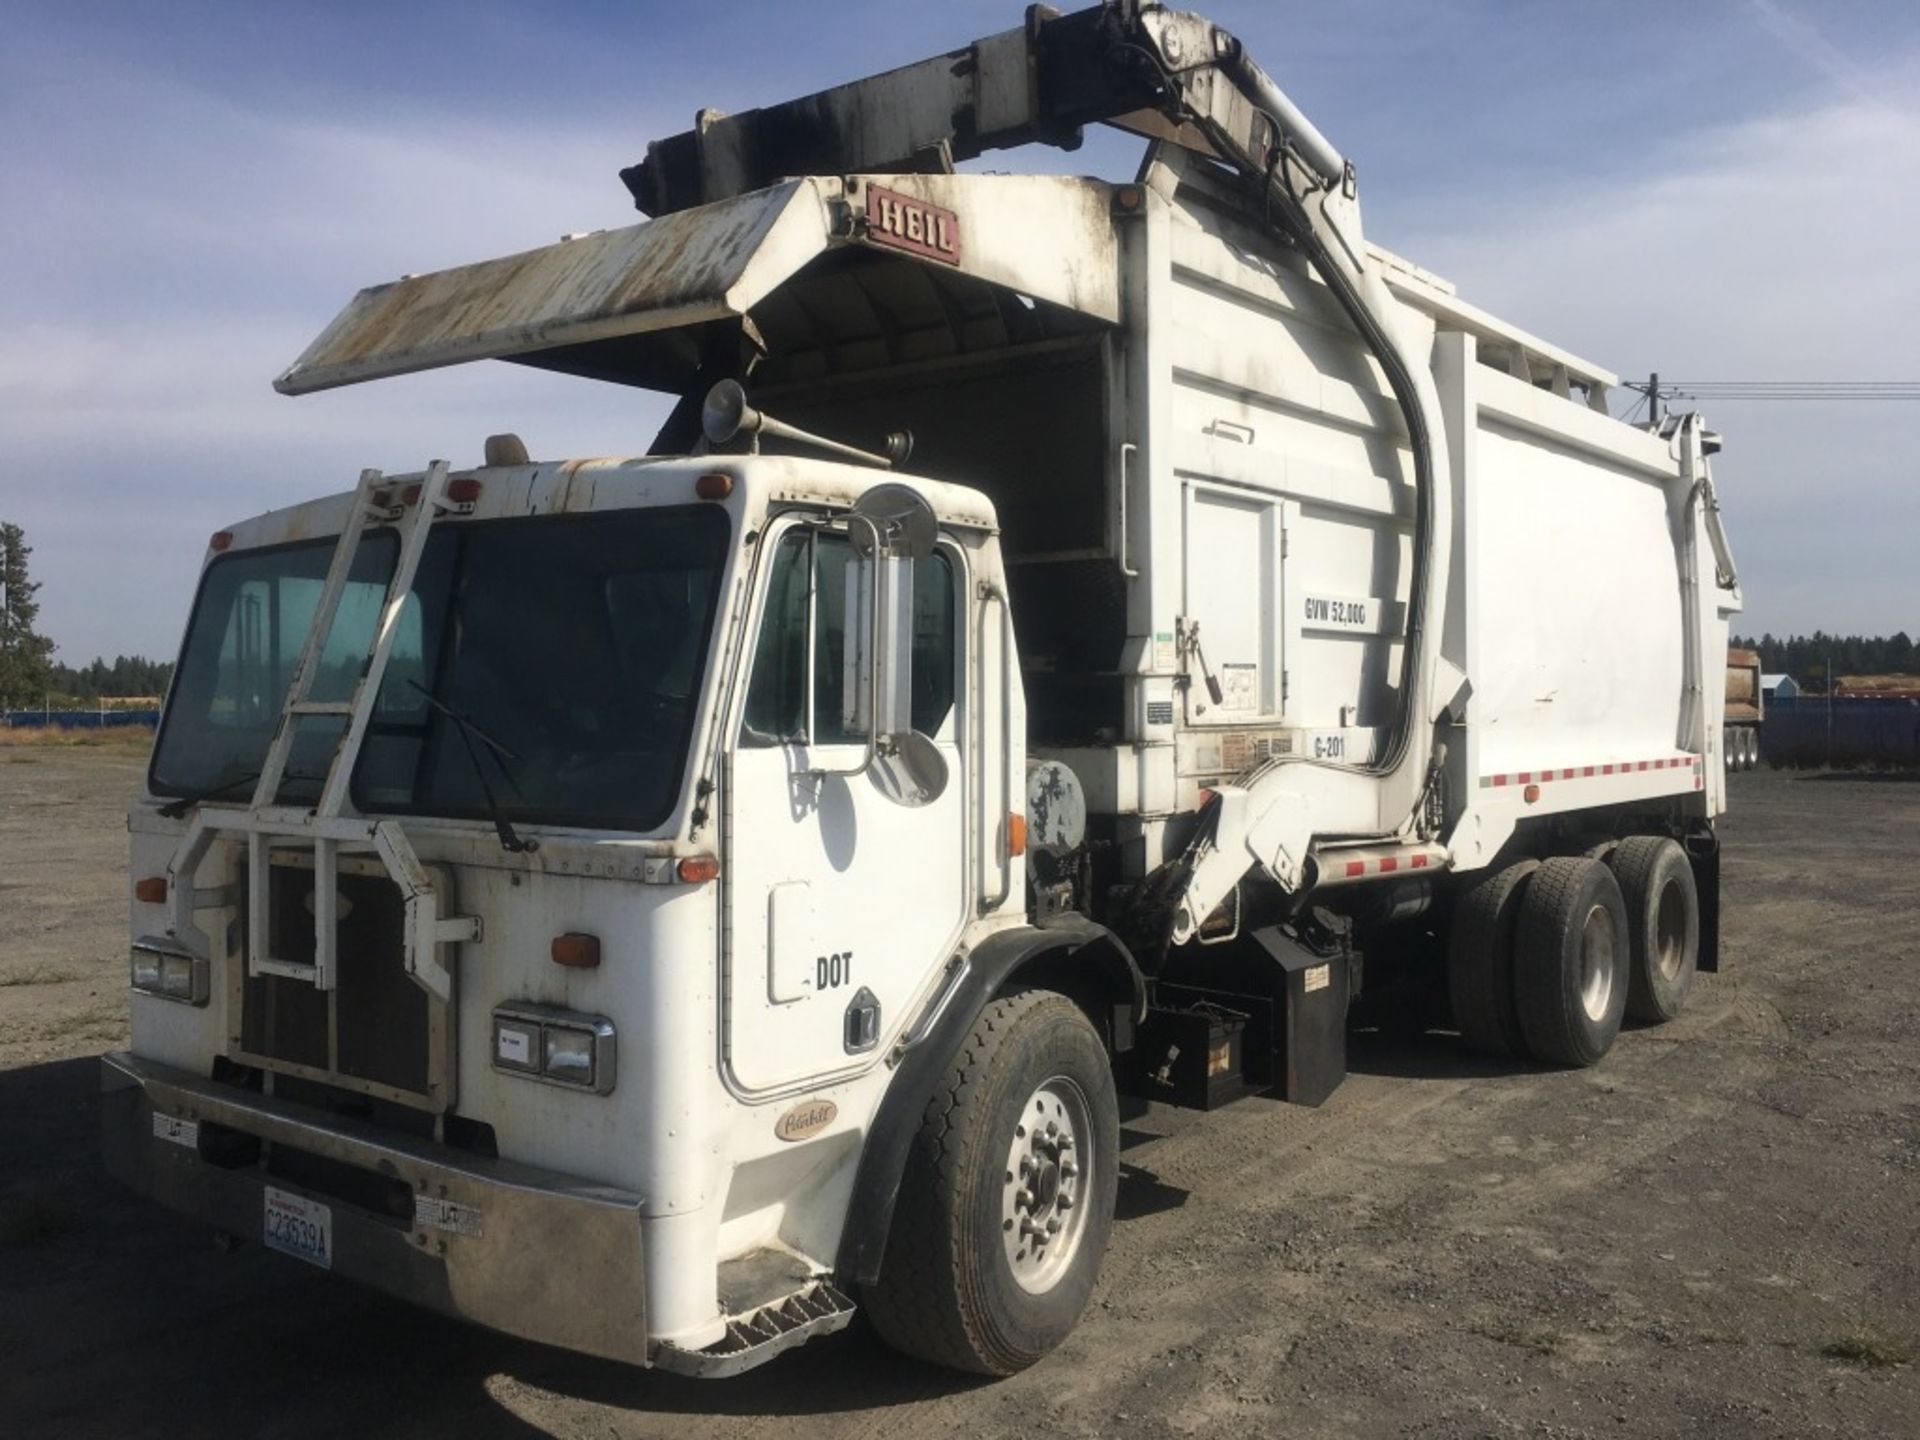 1995 Peterbilt 320 T/A Garbage Truck - Image 2 of 30